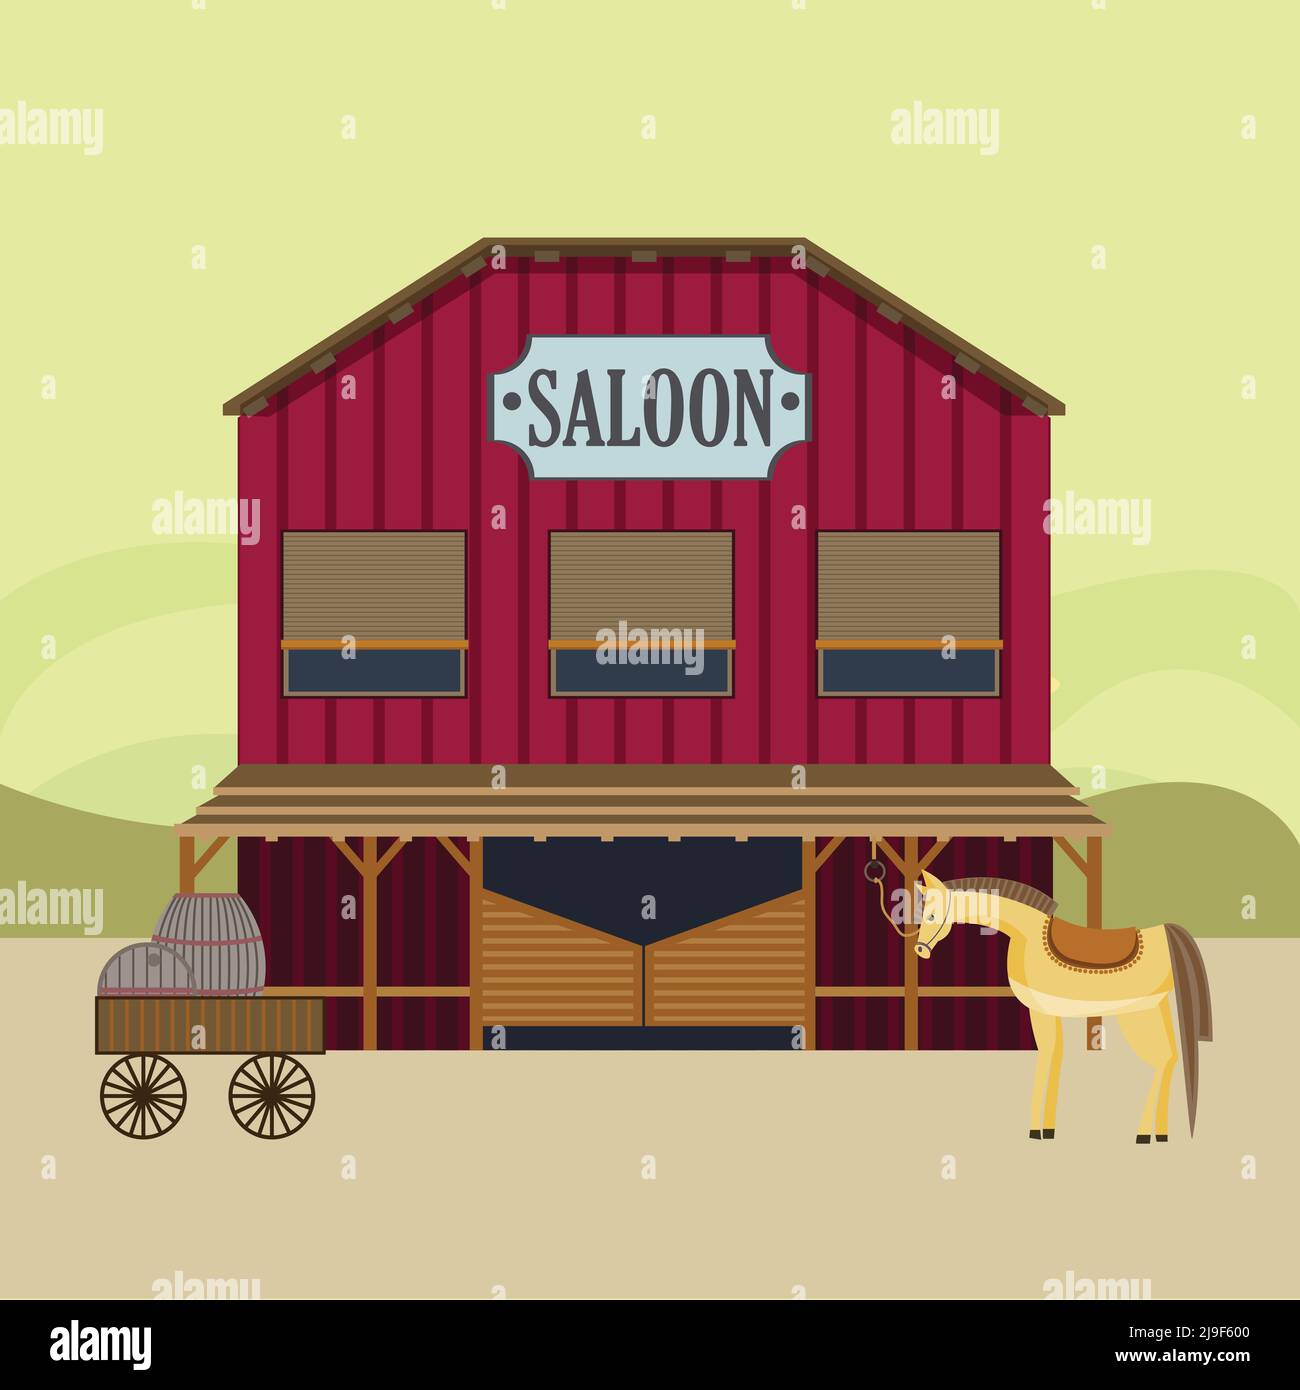 Flat wild west landscape template with saloon building horse waggon wooden barrels vector illustration Stock Vector